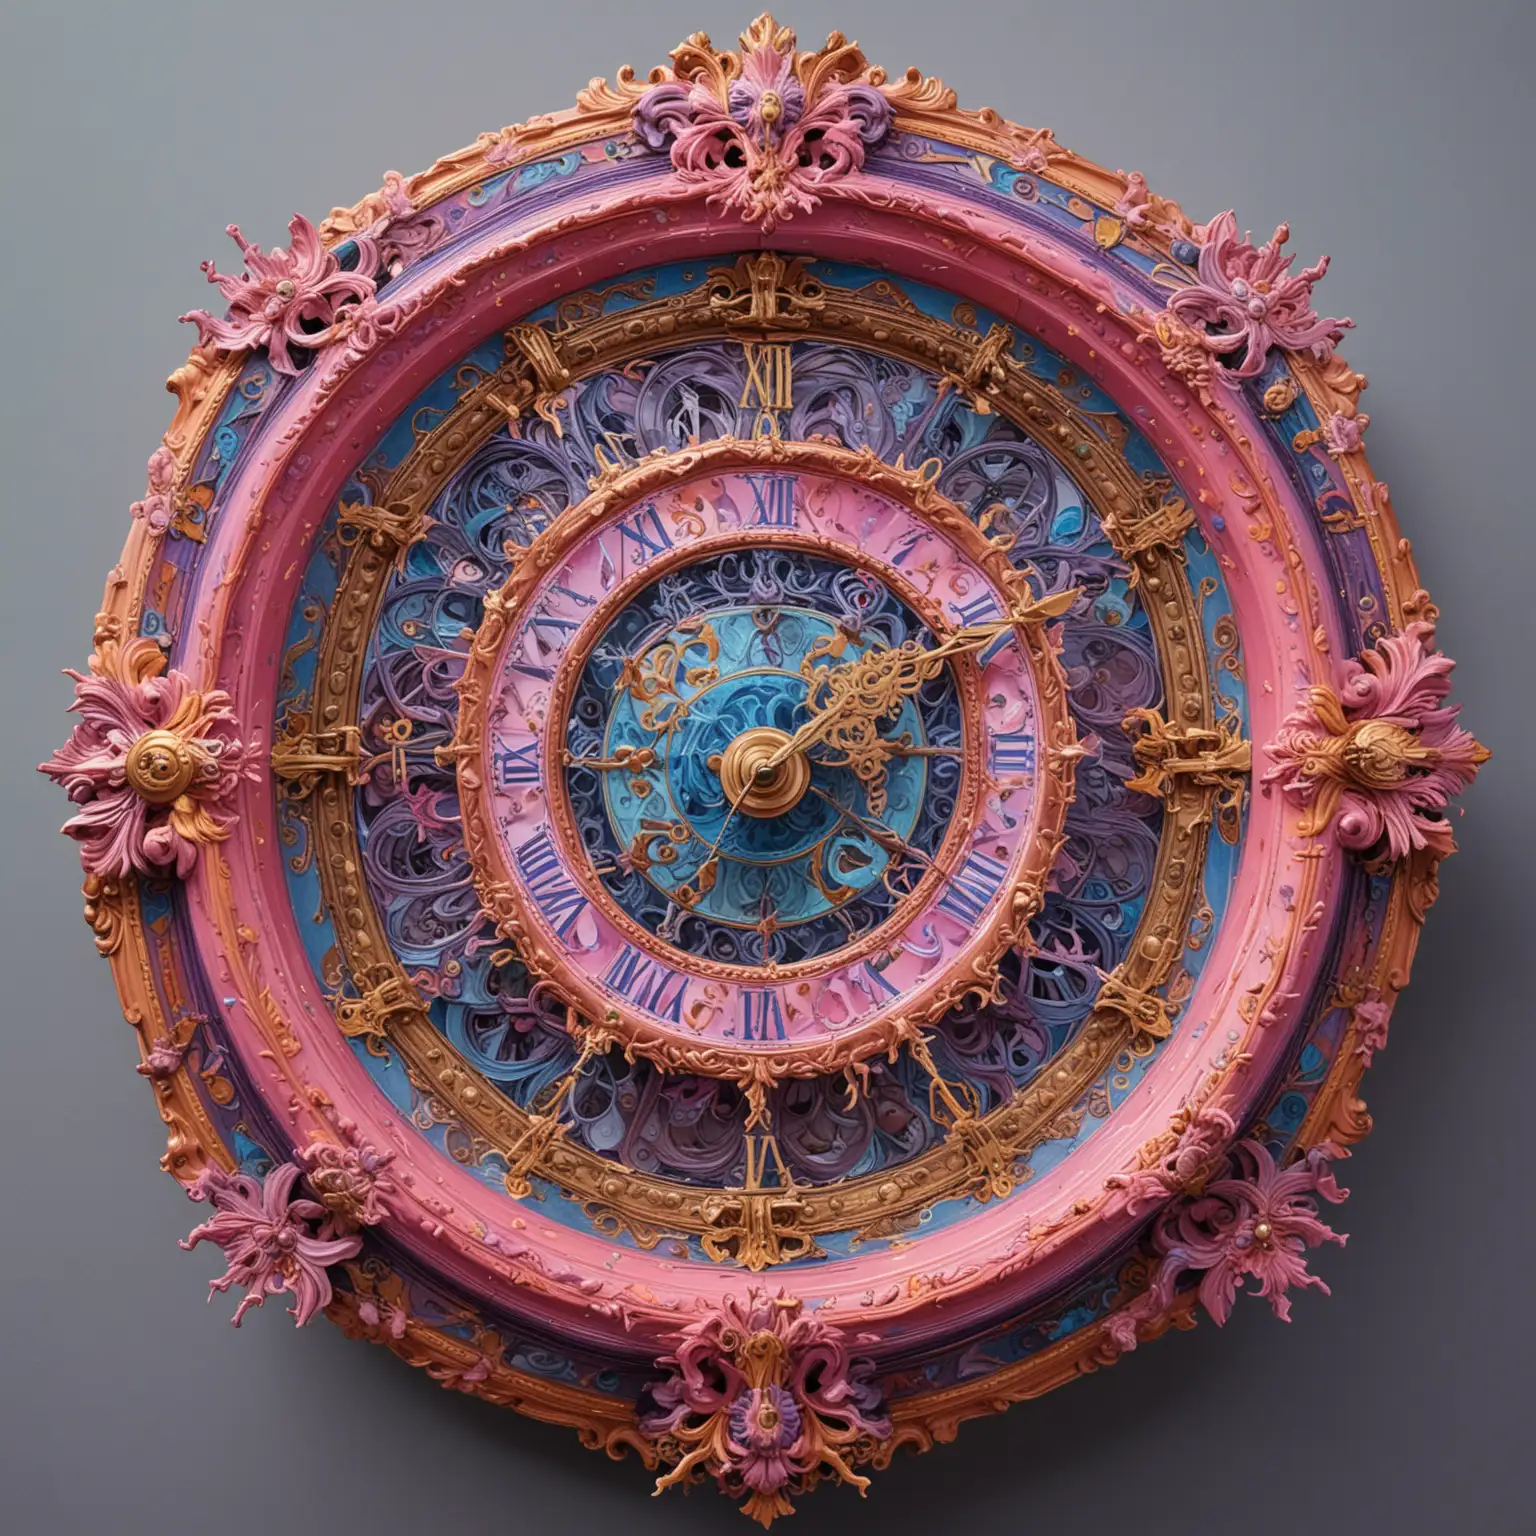 Colorful Ornate Clock with Chaotic Hour Hands